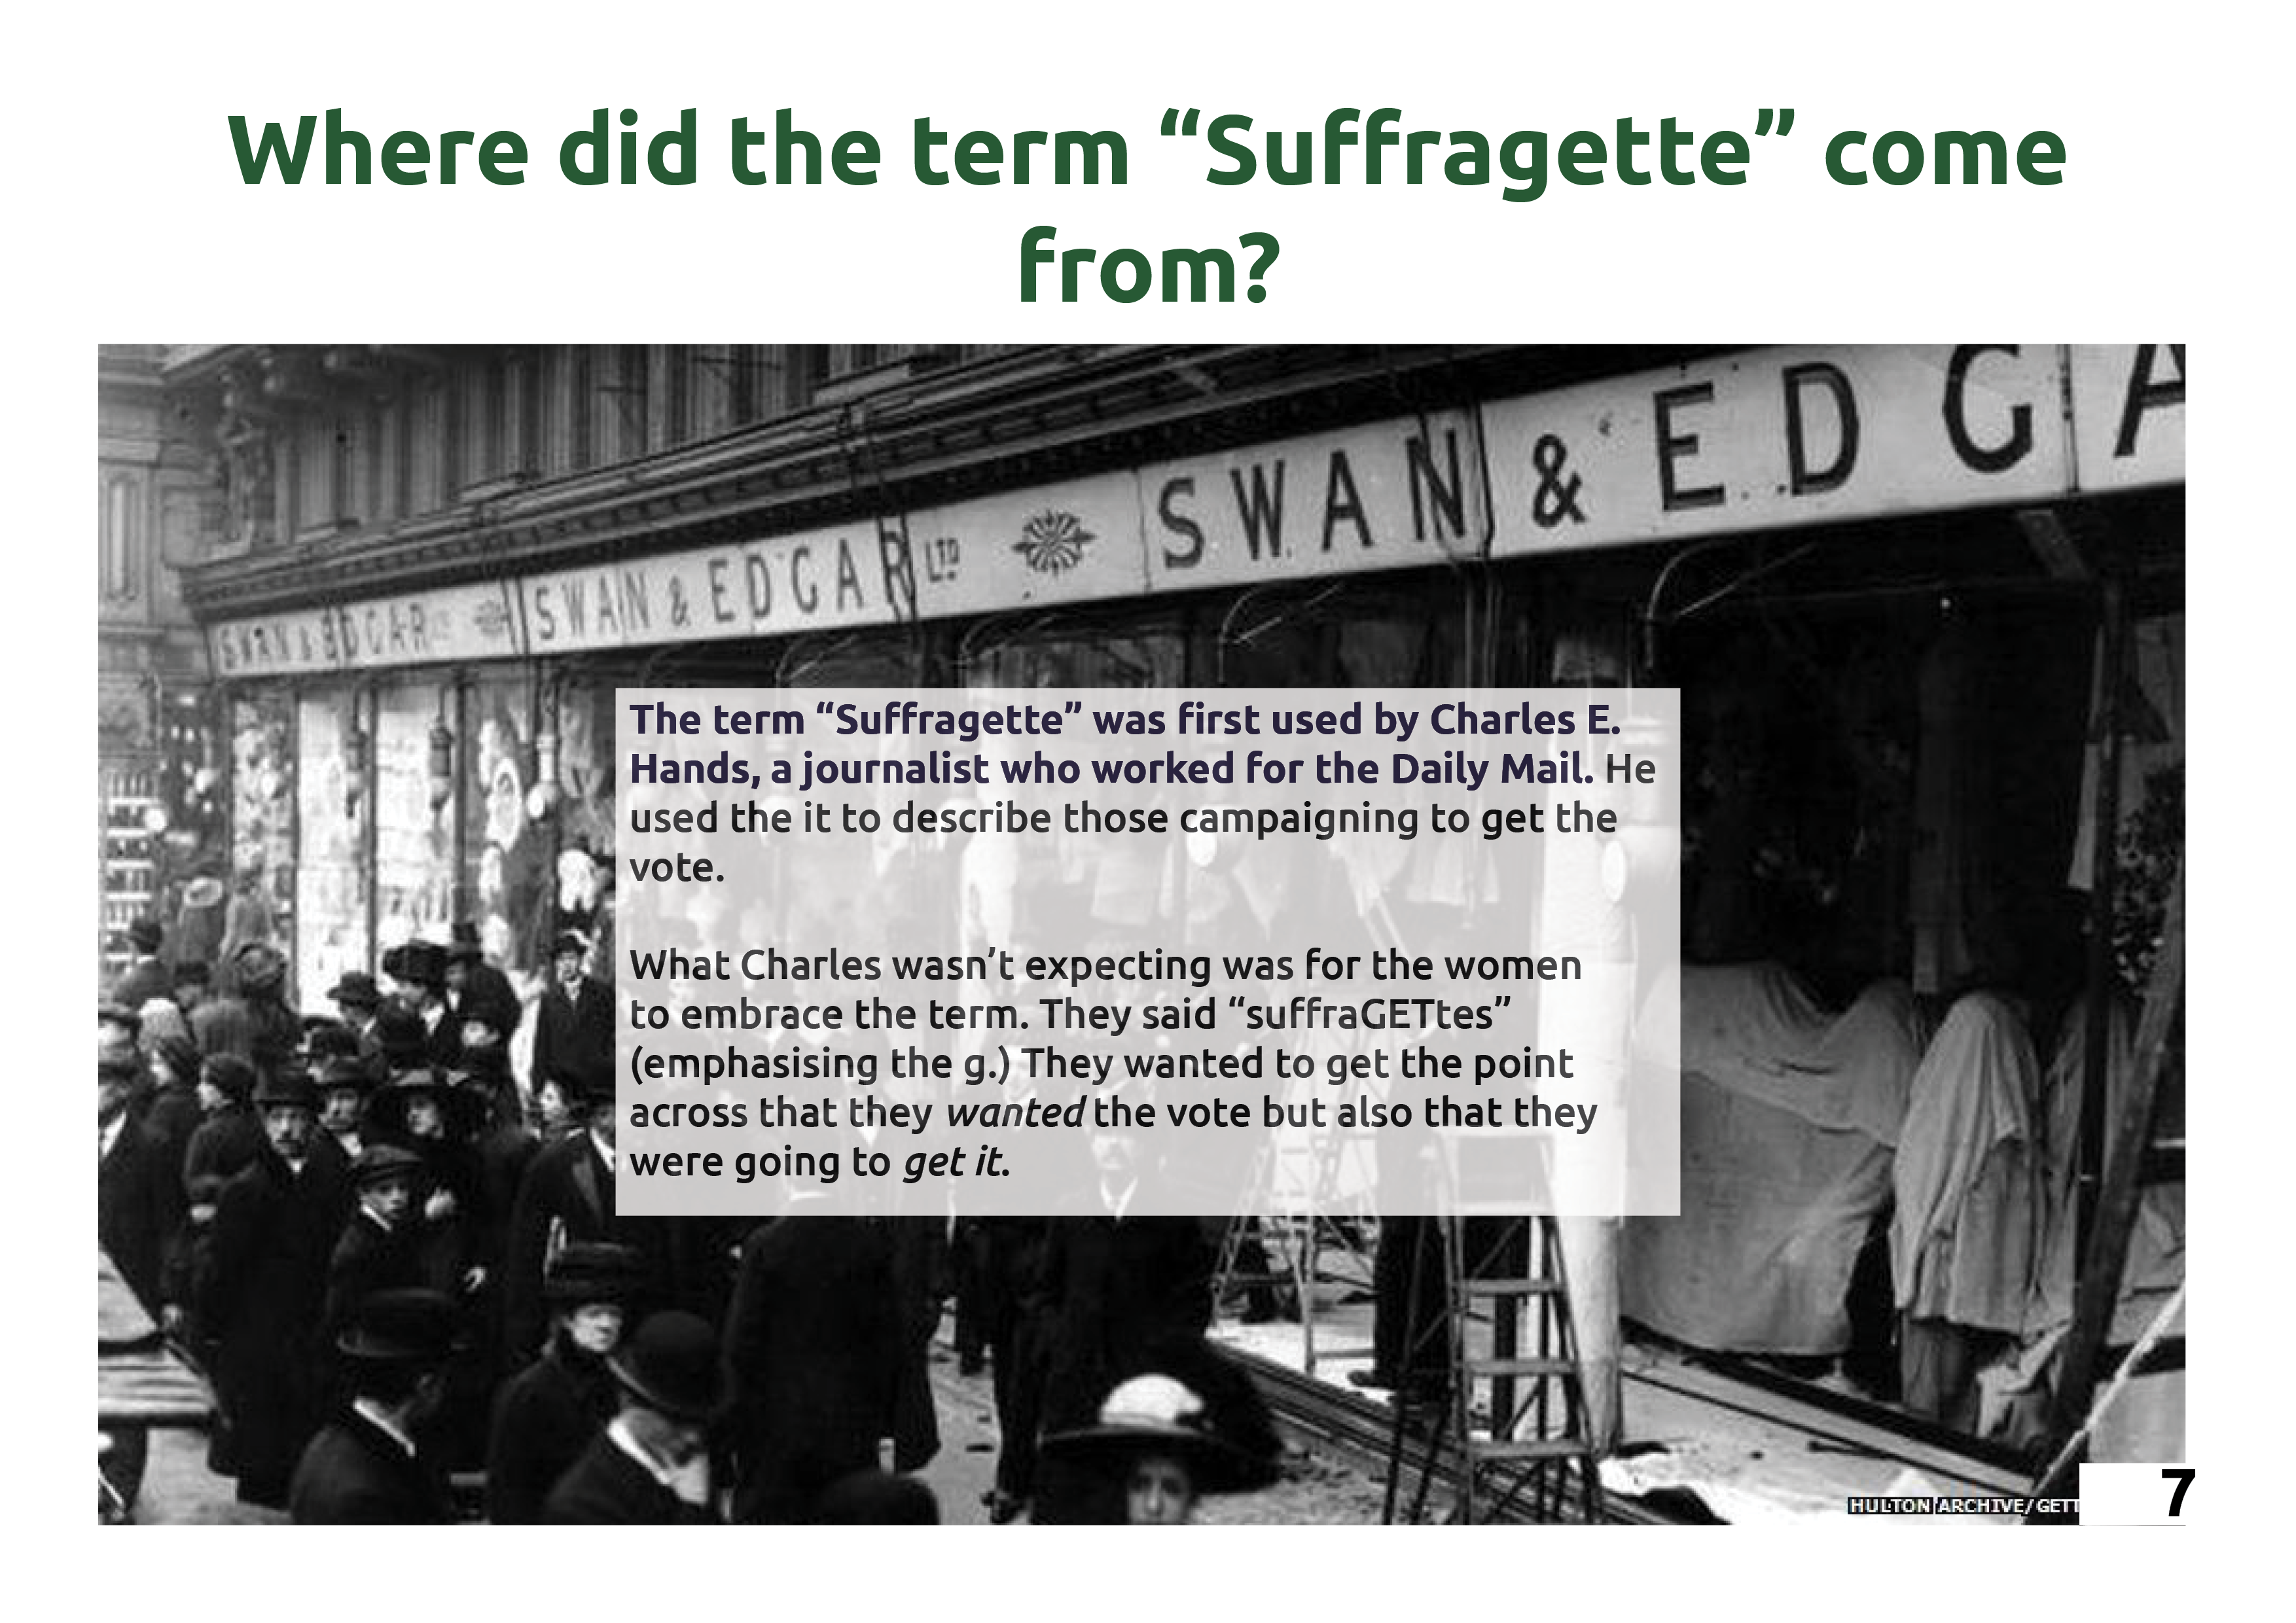 A page of the book about where the term suffragette came from